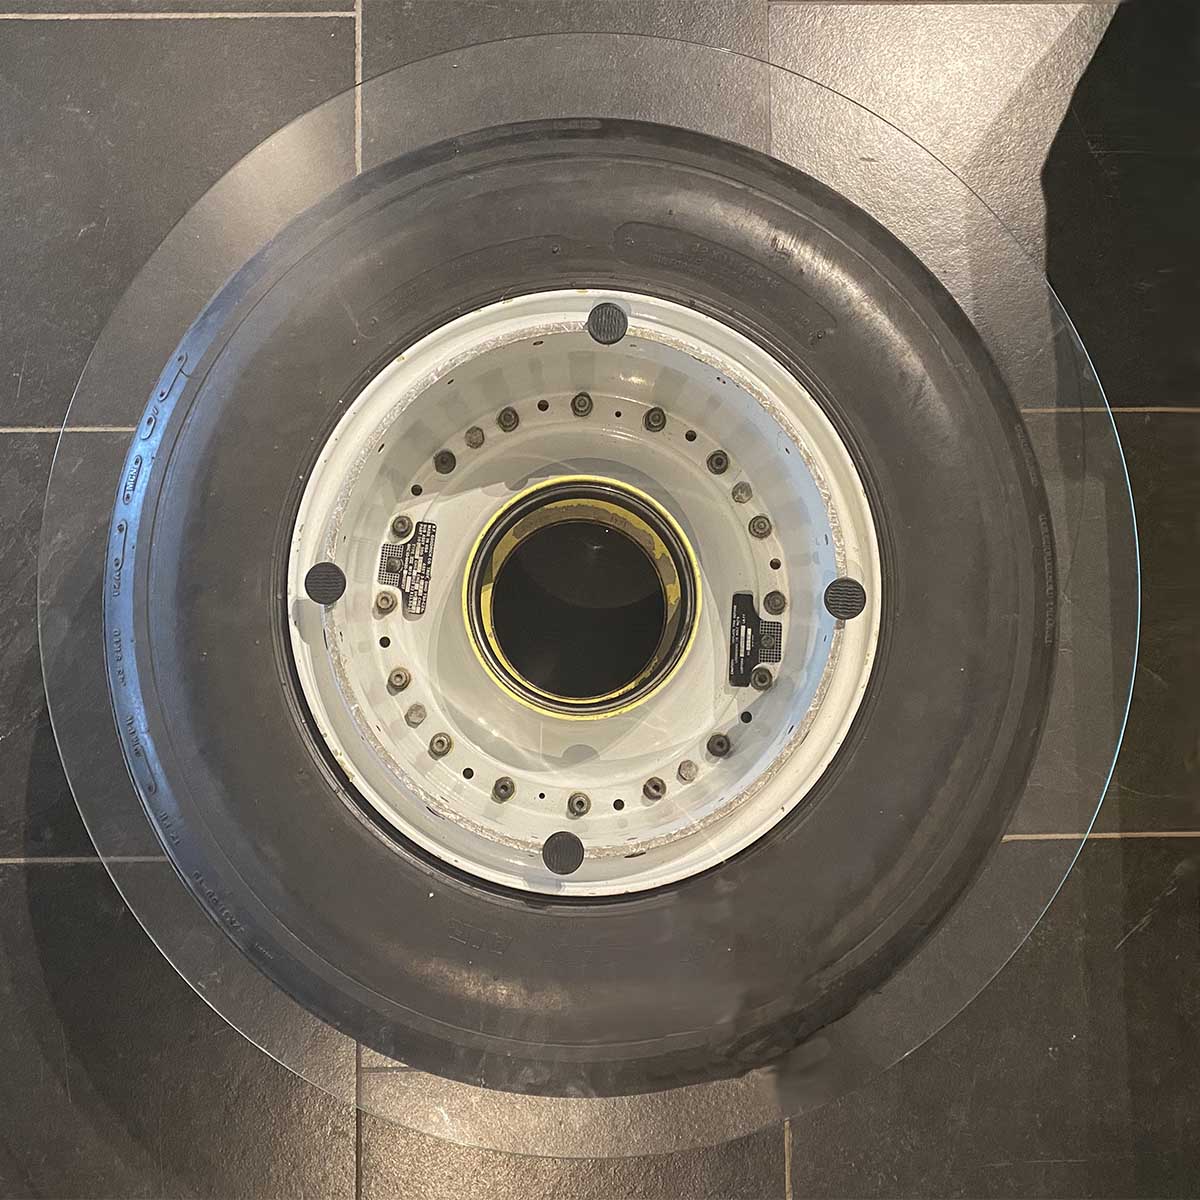 Top view of a coffee table made from the nosewheel of a dismantled Boeing 727.